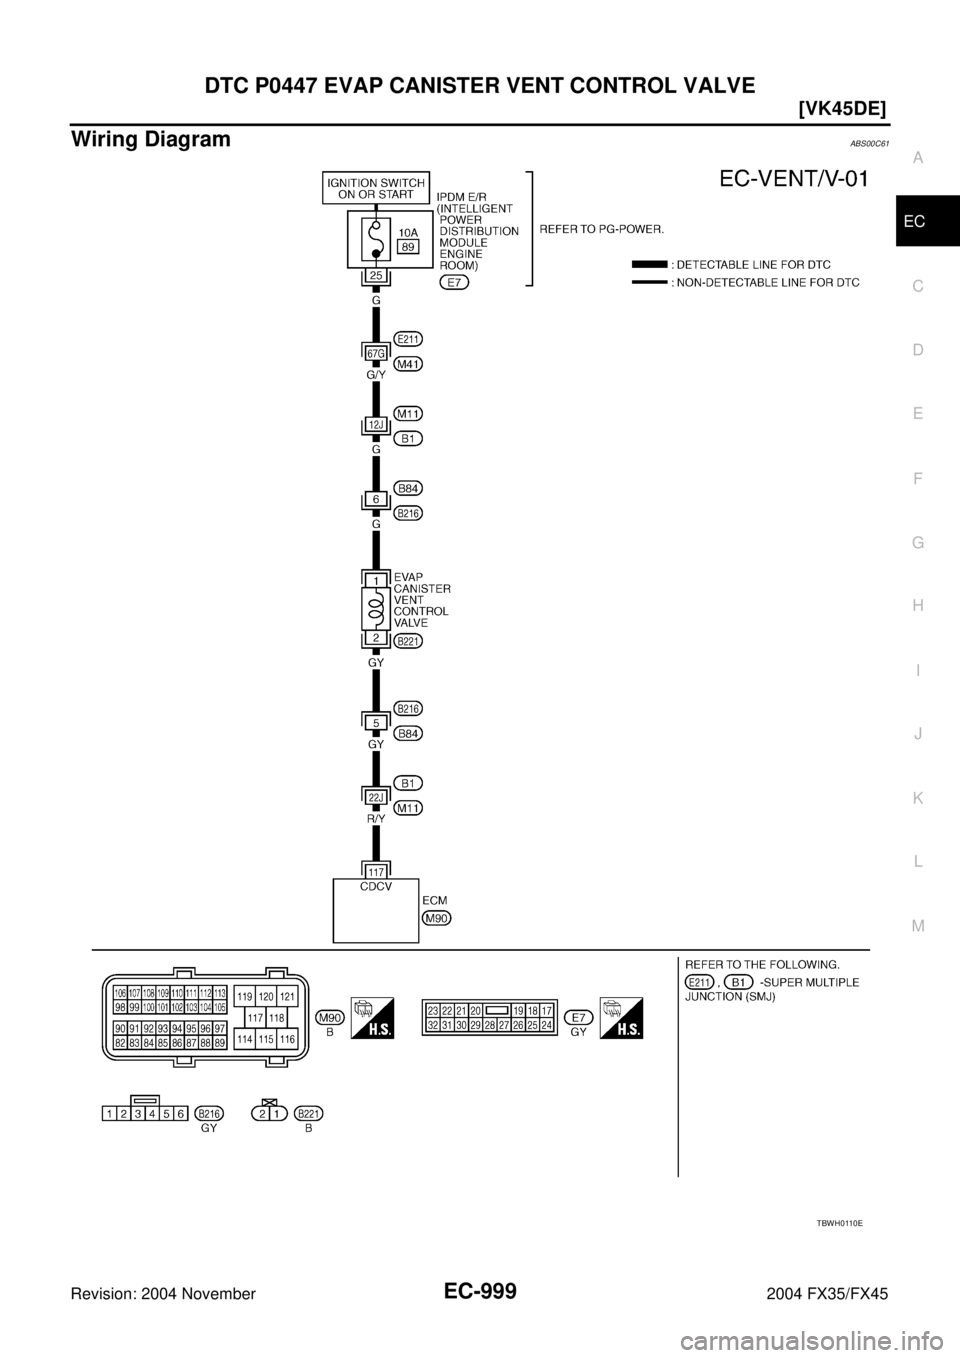 INFINITI FX35 2004  Service Manual DTC P0447 EVAP CANISTER VENT CONTROL VALVE
EC-999
[VK45DE]
C
D
E
F
G
H
I
J
K
L
MA
EC
Revision: 2004 November 2004 FX35/FX45
Wiring DiagramABS00C61
TBWH0110E 